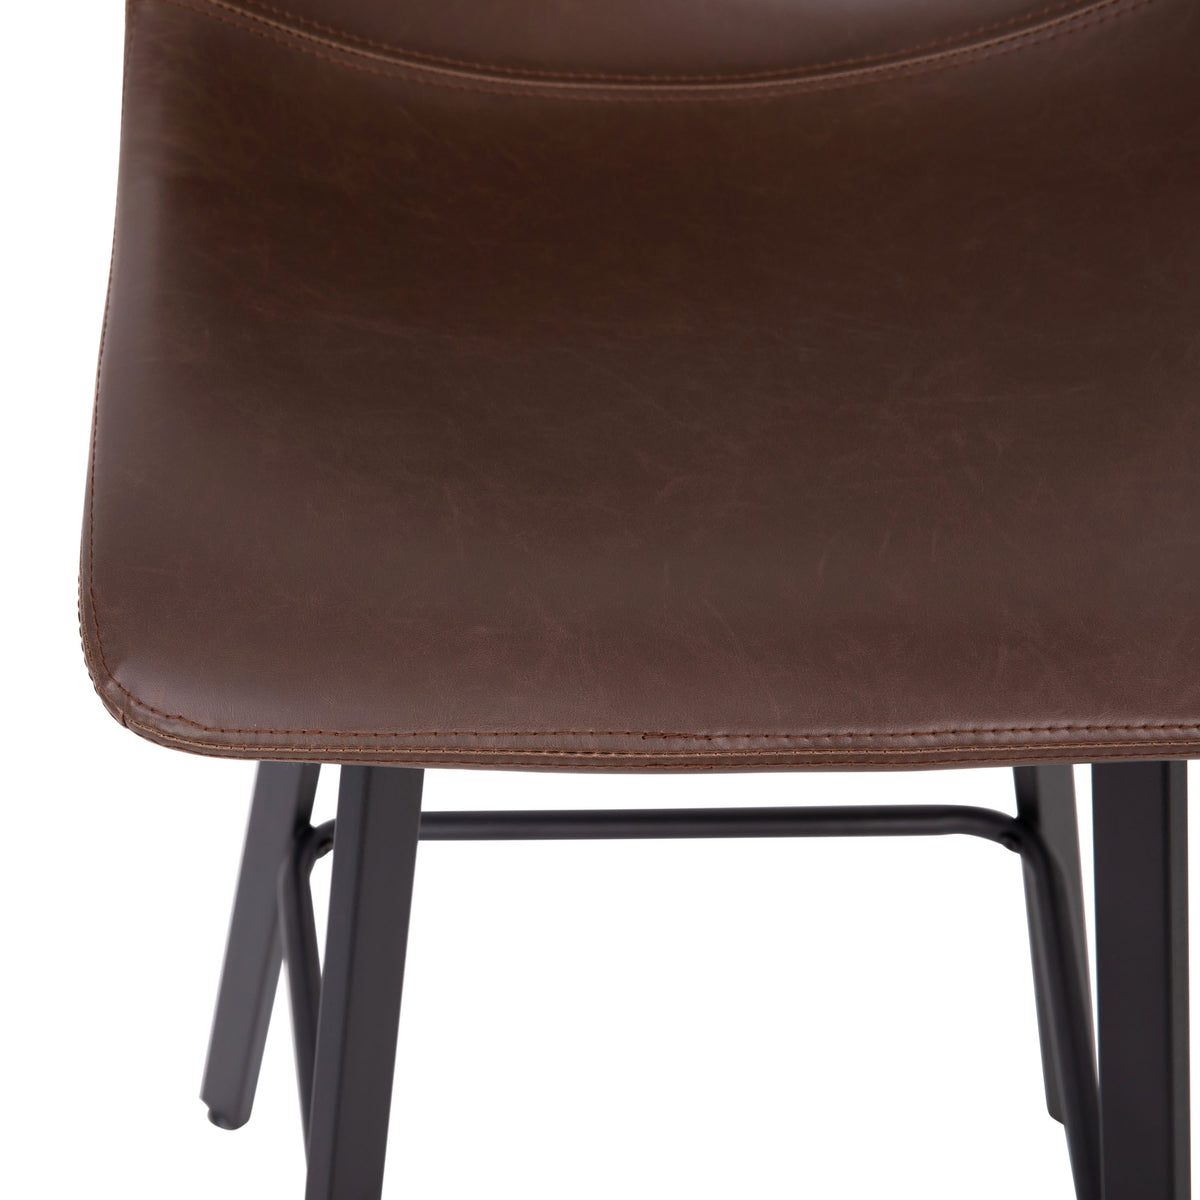 Chocolate Brown LeatherSoft |#| Set of 2 Commercial Indoor Armless Iron Barstools - Chocolate Brown LeatherSoft